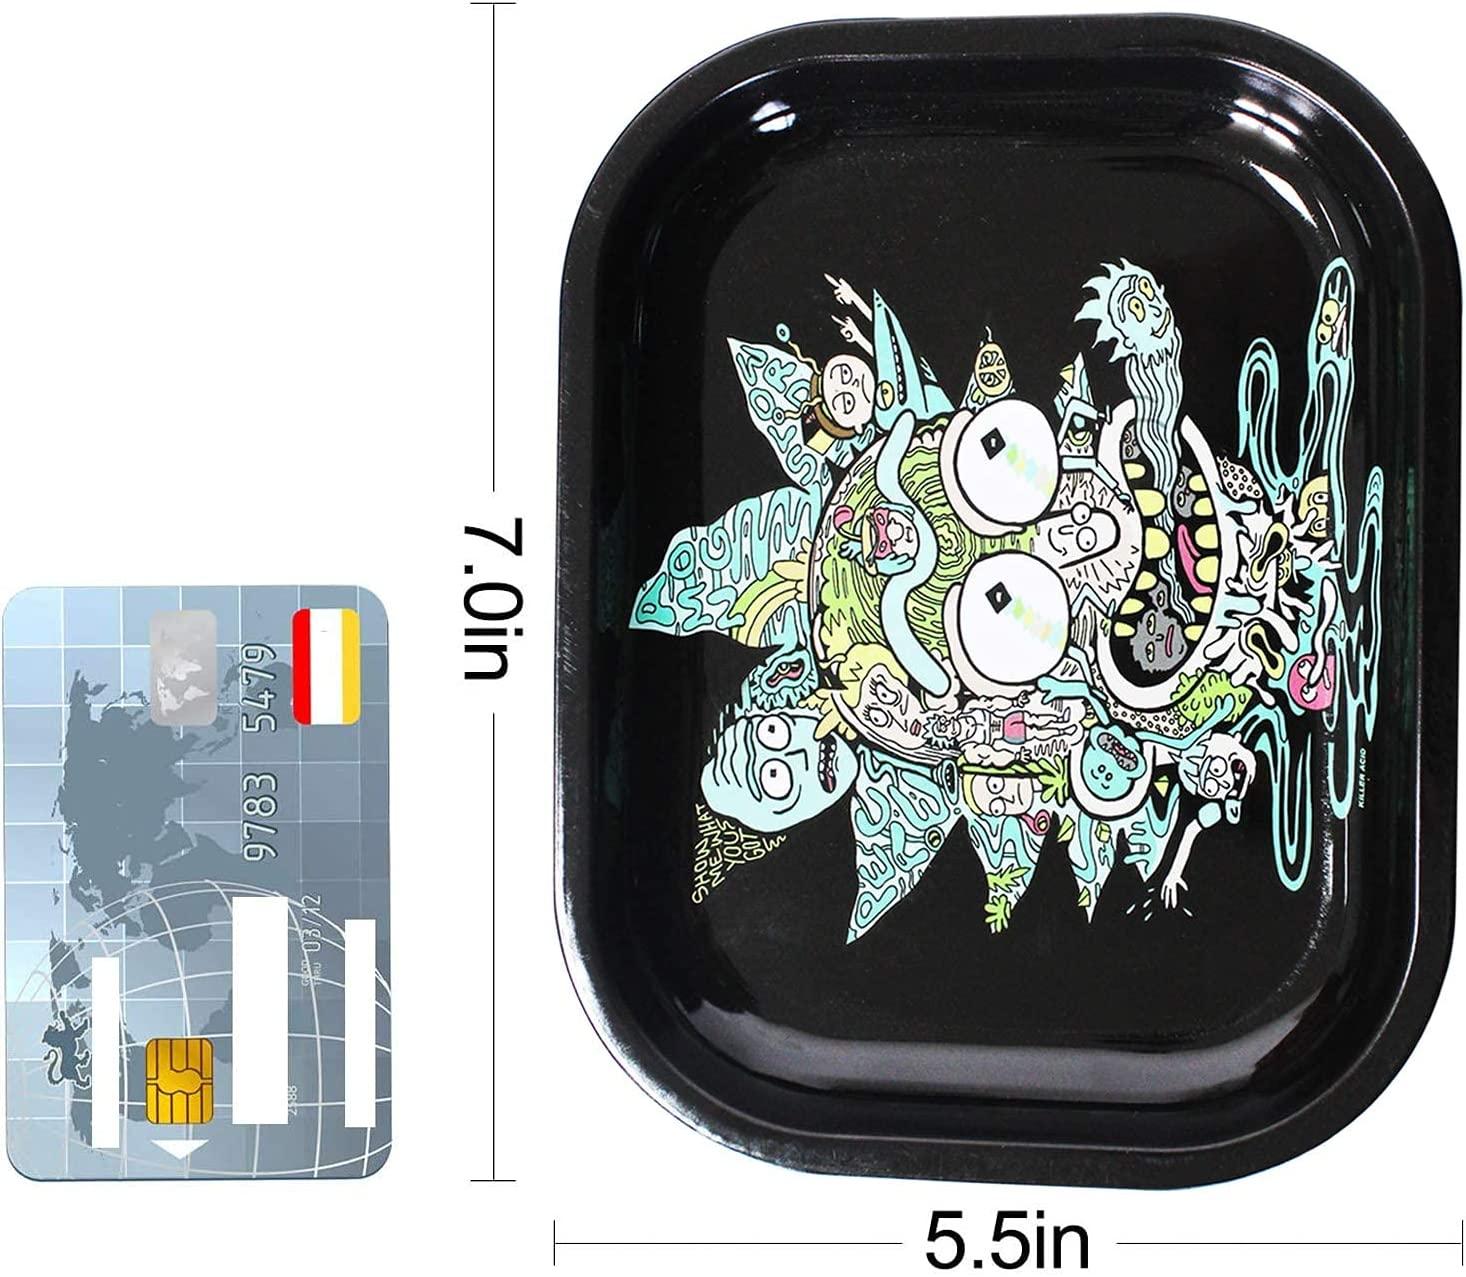 Hand High Trippy Rolling Tray  High Quality Metal Trays – Toke Tray